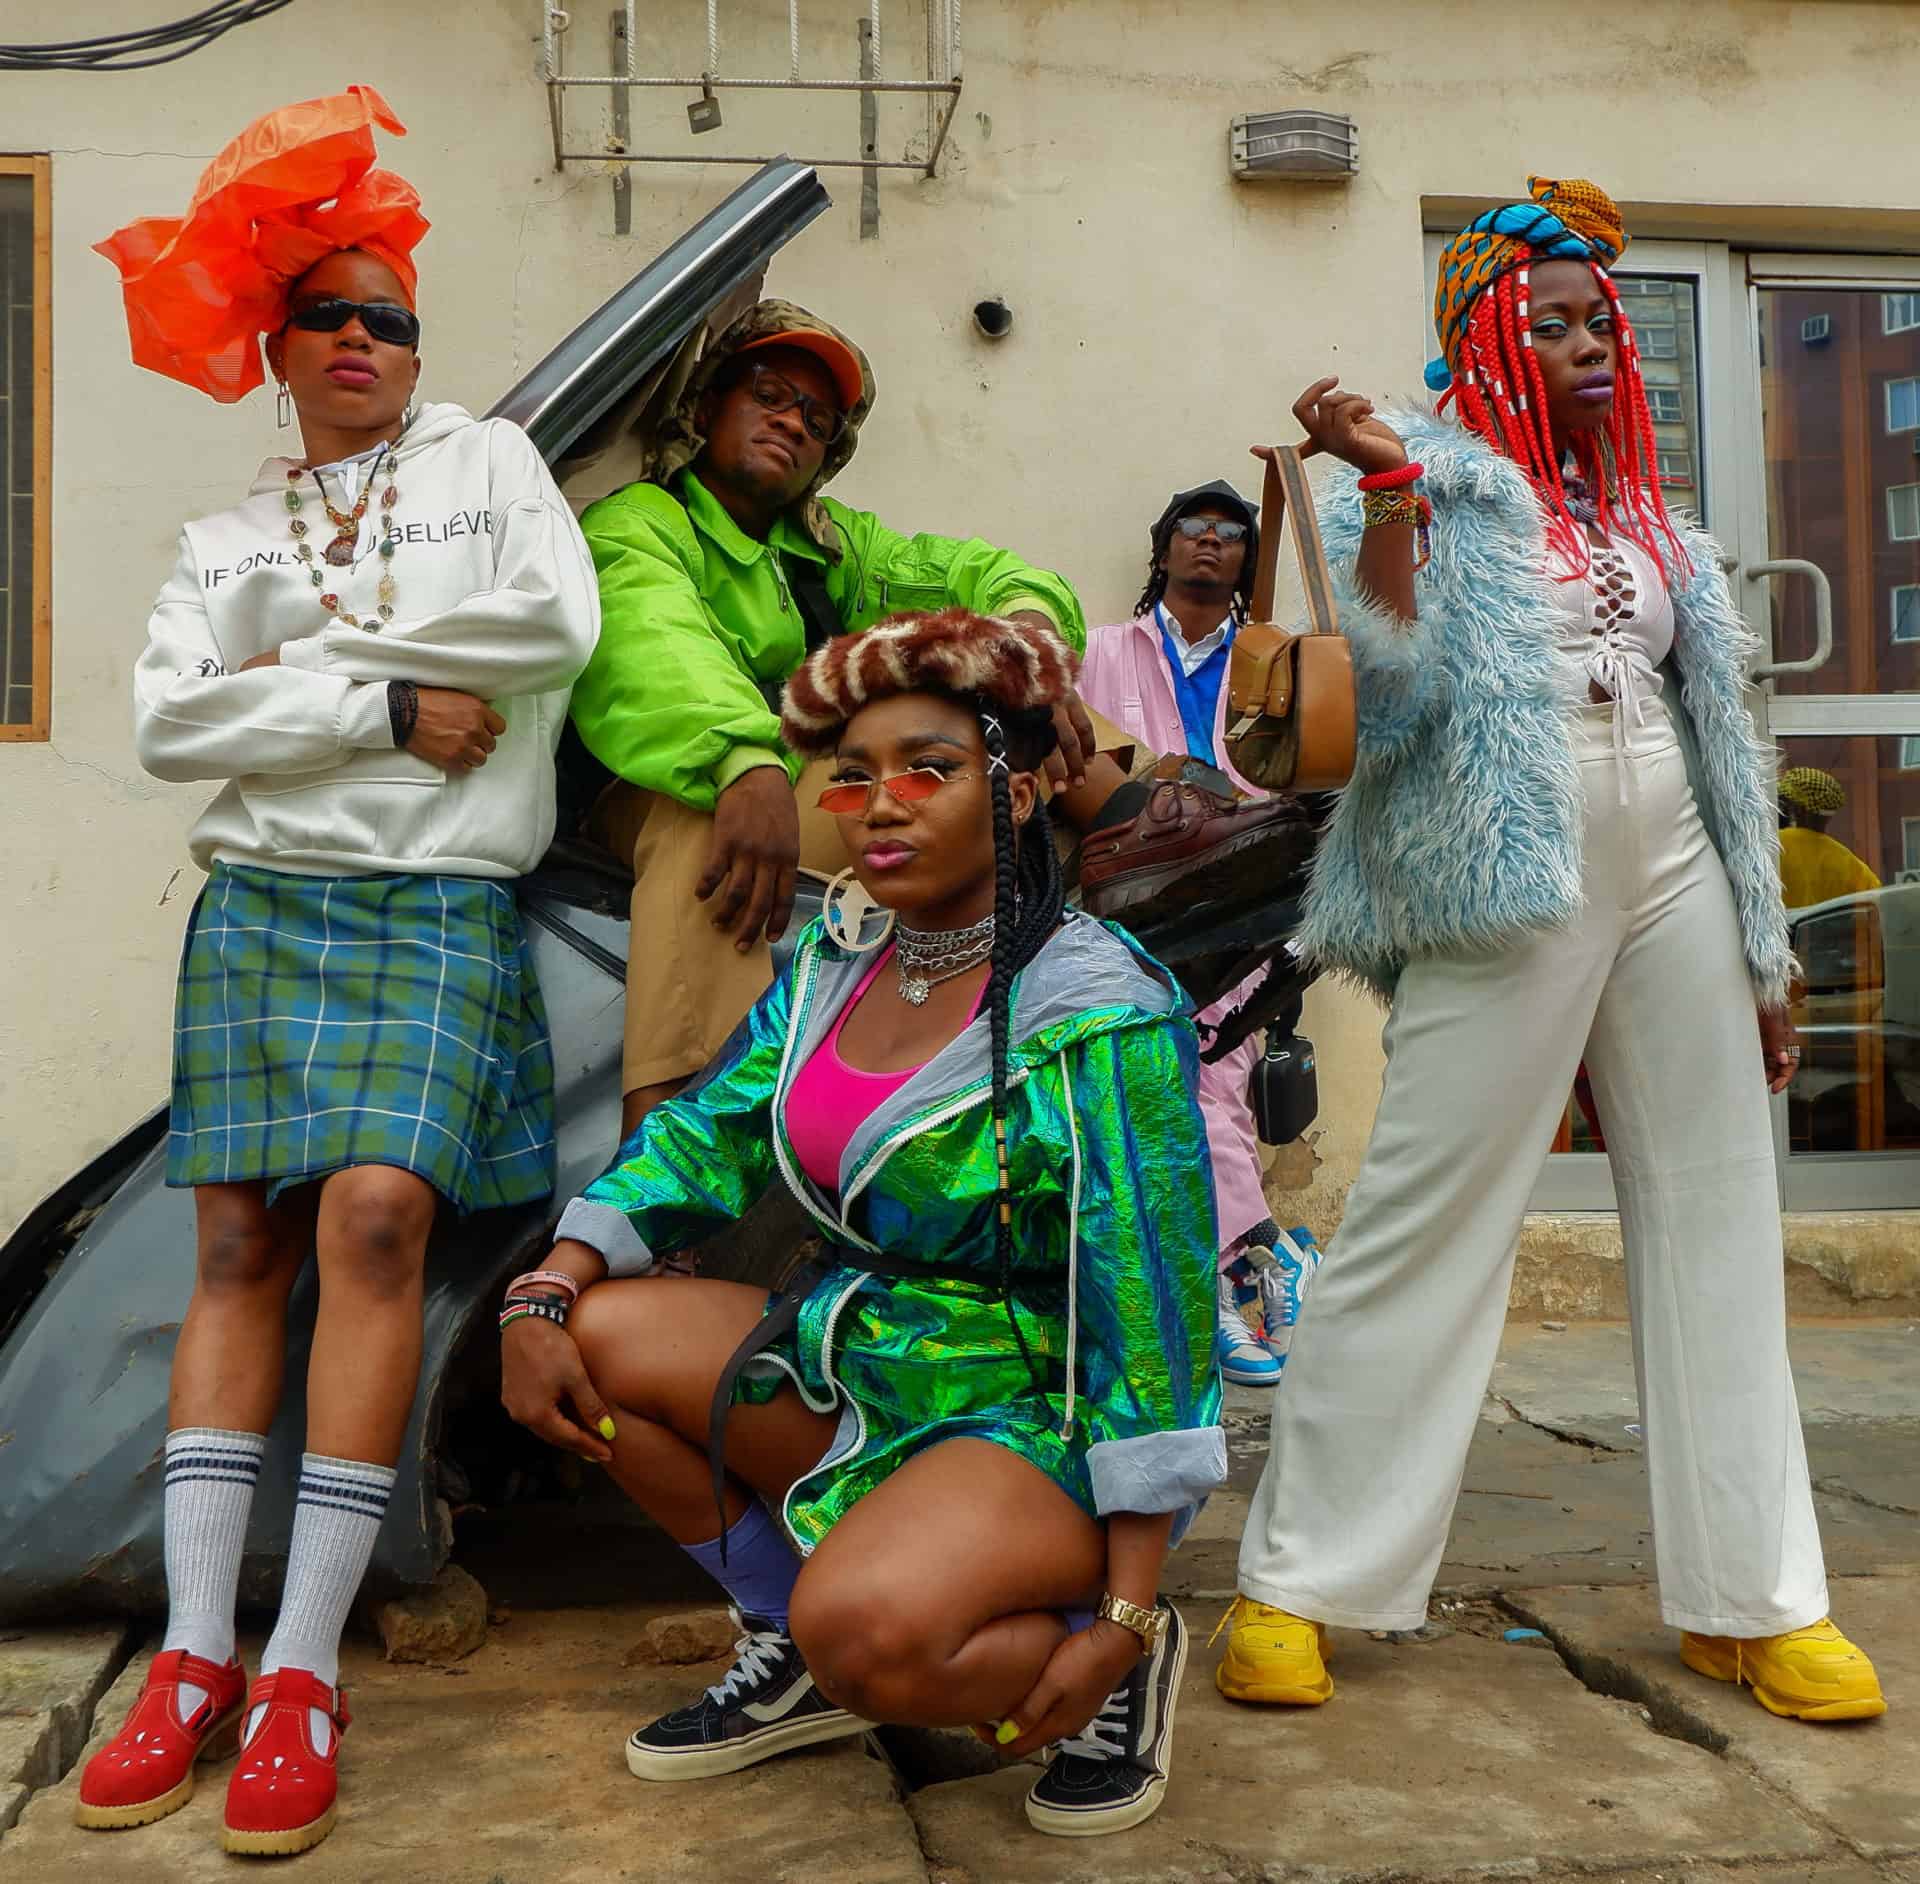 Performers from QDance Company in Lagos, Nigeria, gather on the sidewalk in brilliantly colorful contemporary clothing. Press photo courtesy of PS21 and the artists